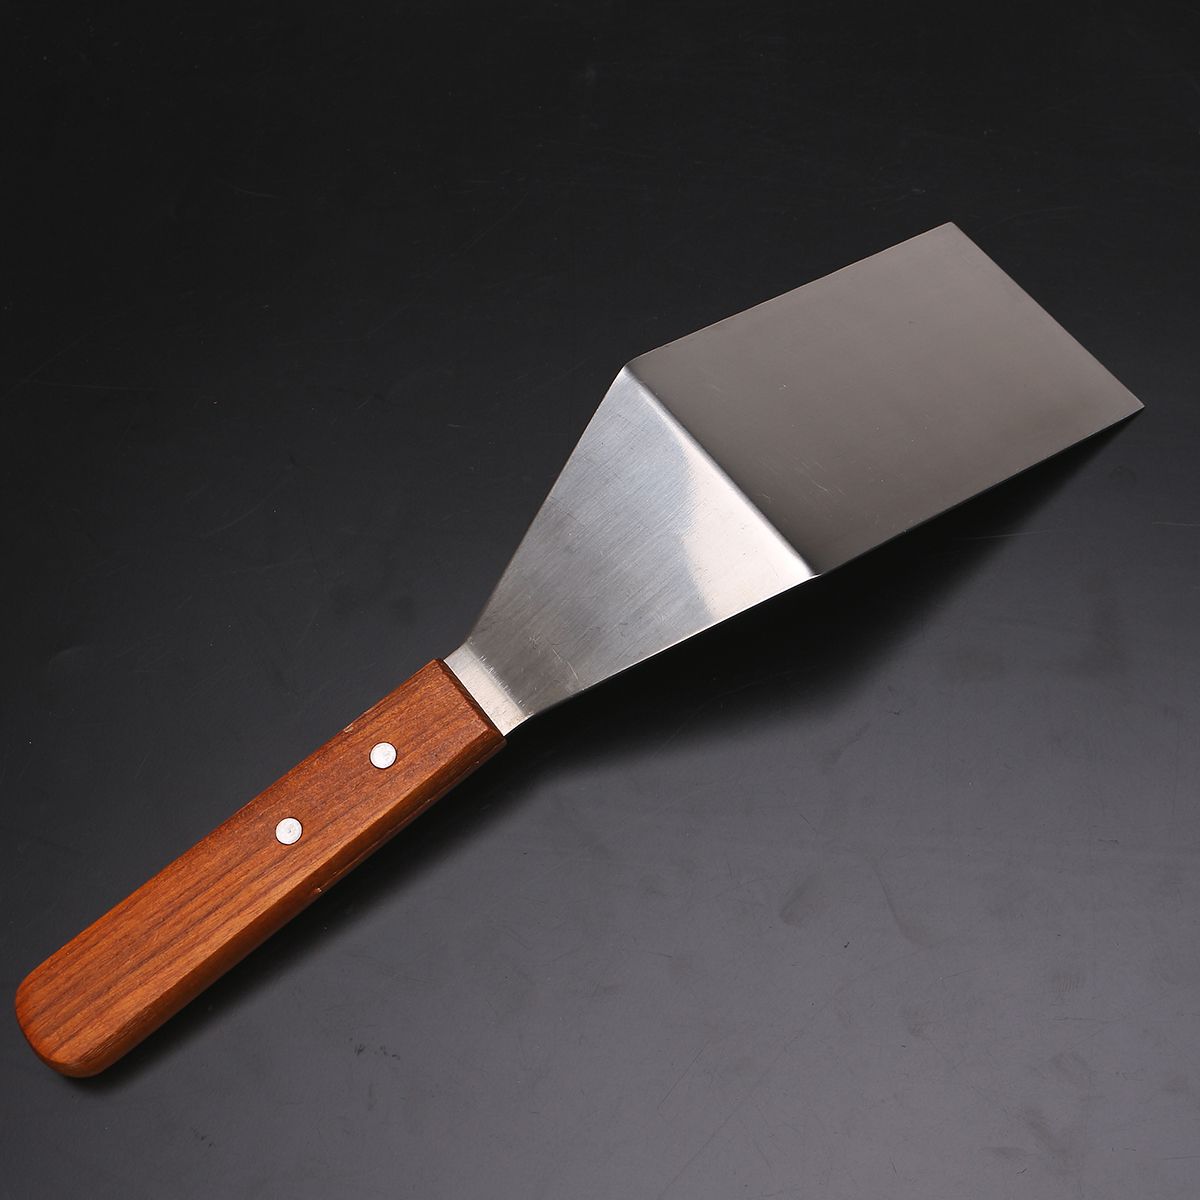 29times7times15cm-Stainless-Steel-Spatula-Scrapers-Pancake-Shovel-Turner-Scoop-With-Wooden-Handle-1341082